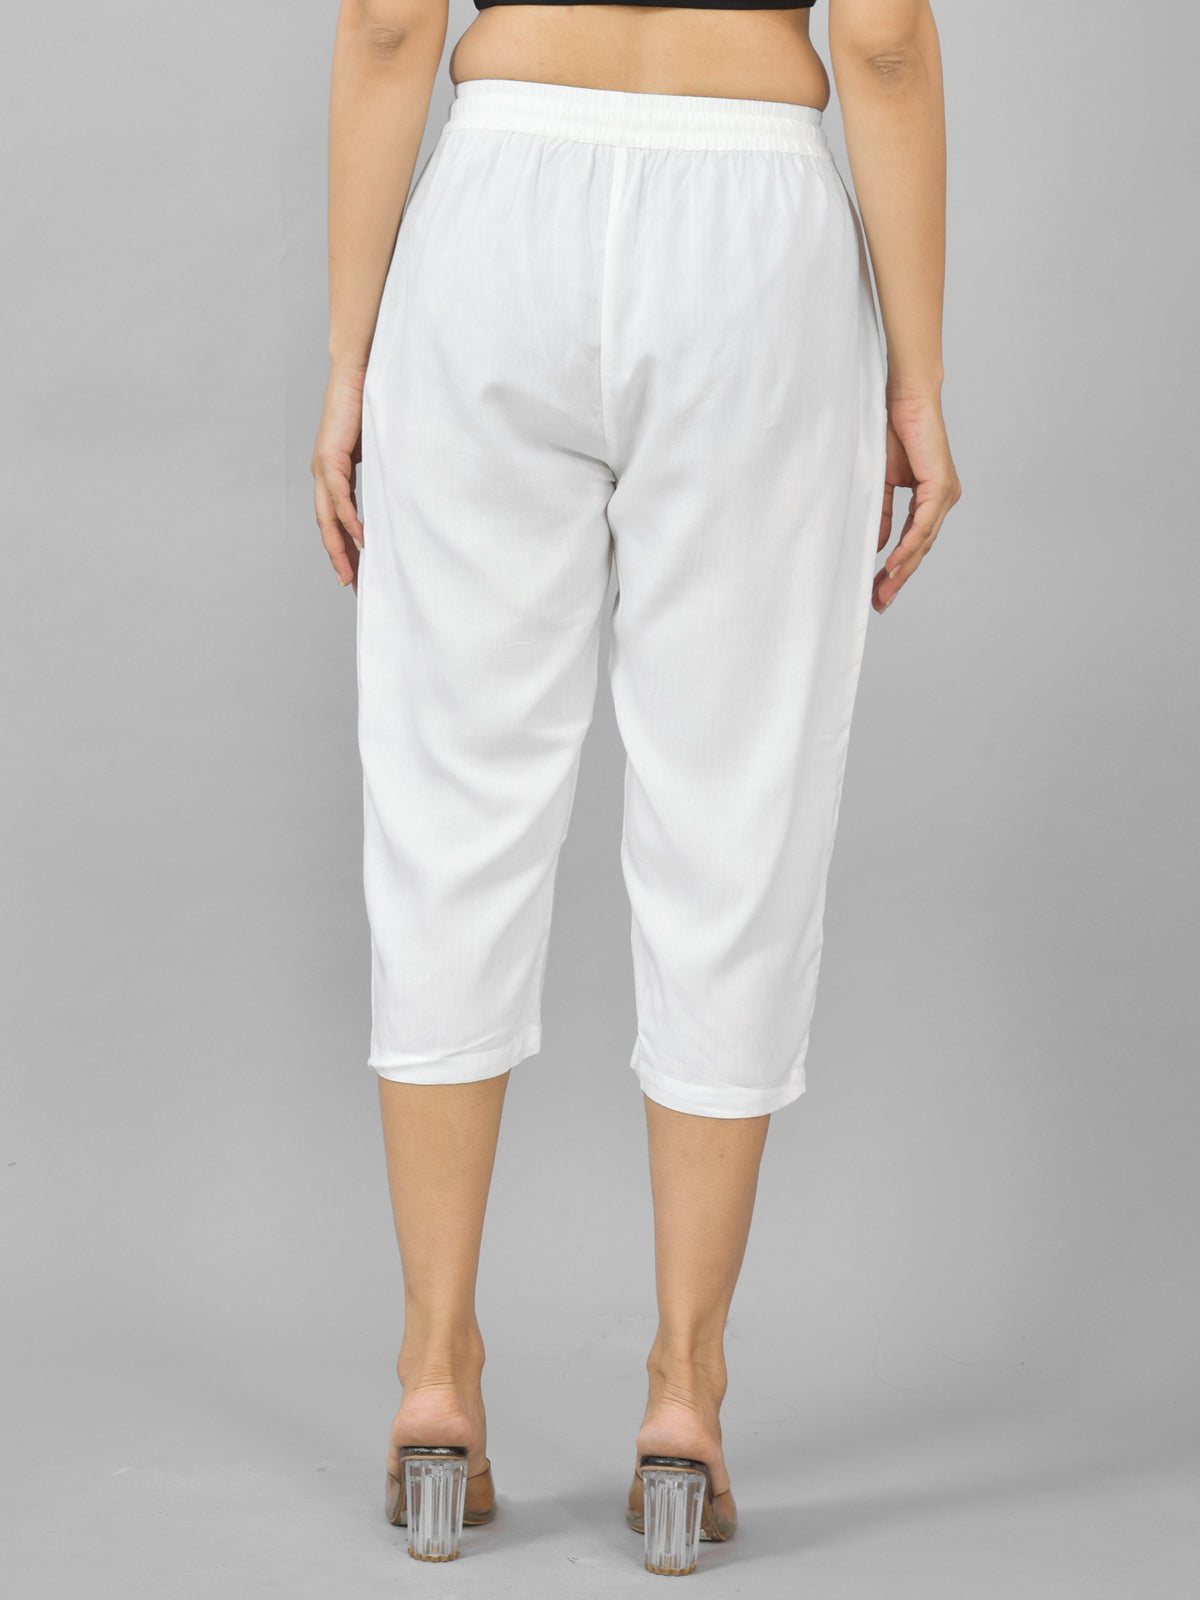 Pack Of 2 Women White And Wine Calf Length Rayon Culottes Trouser Combo